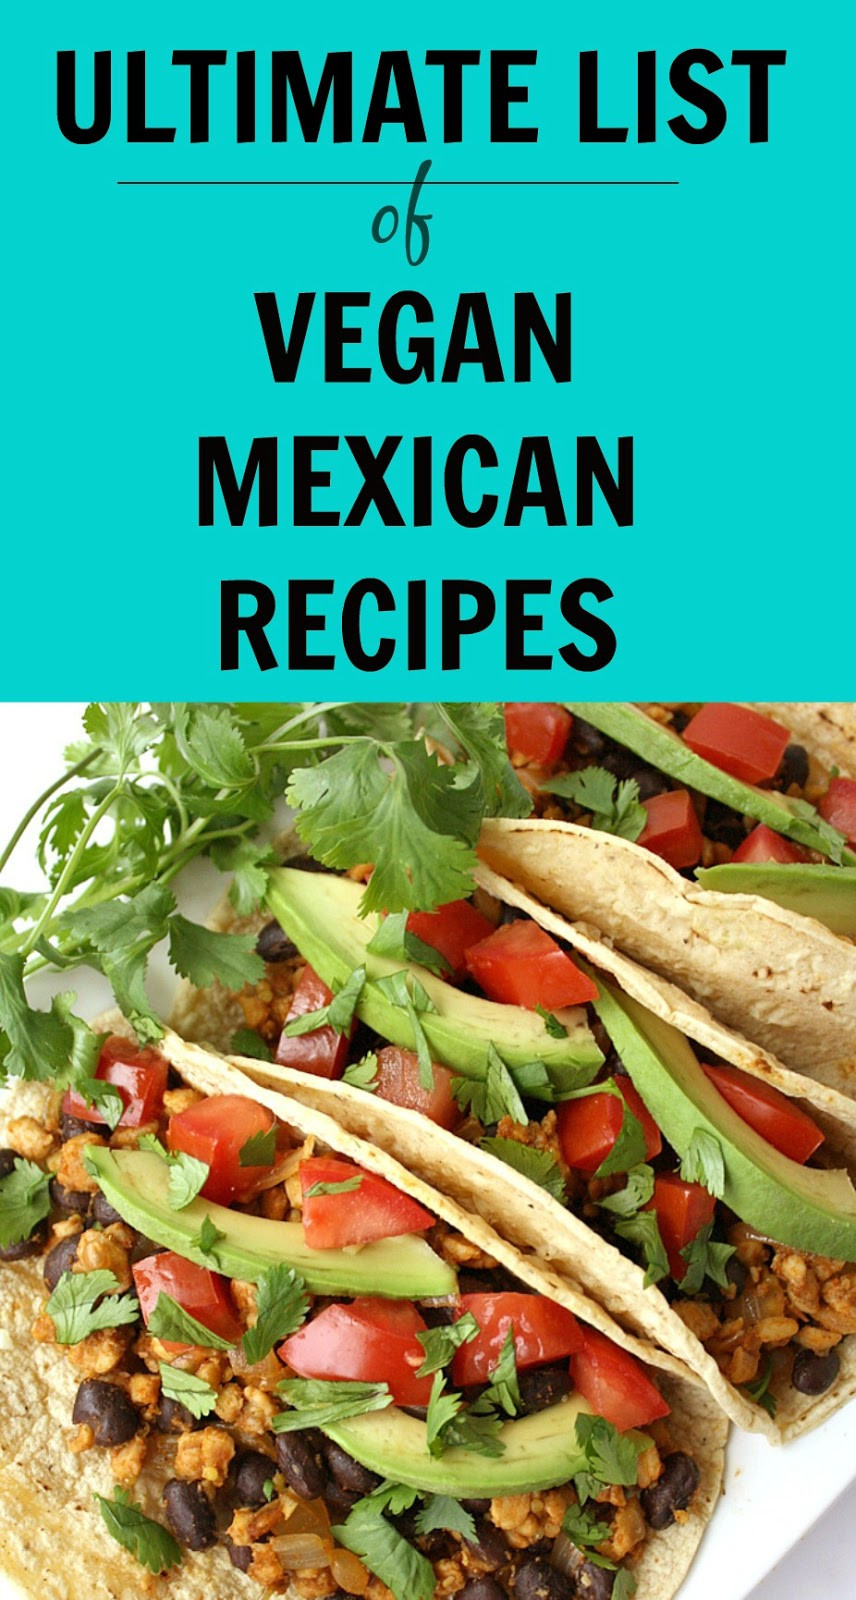 Awesome Vegan Recipes
 Ultimate List of Vegan Mexican Recipes